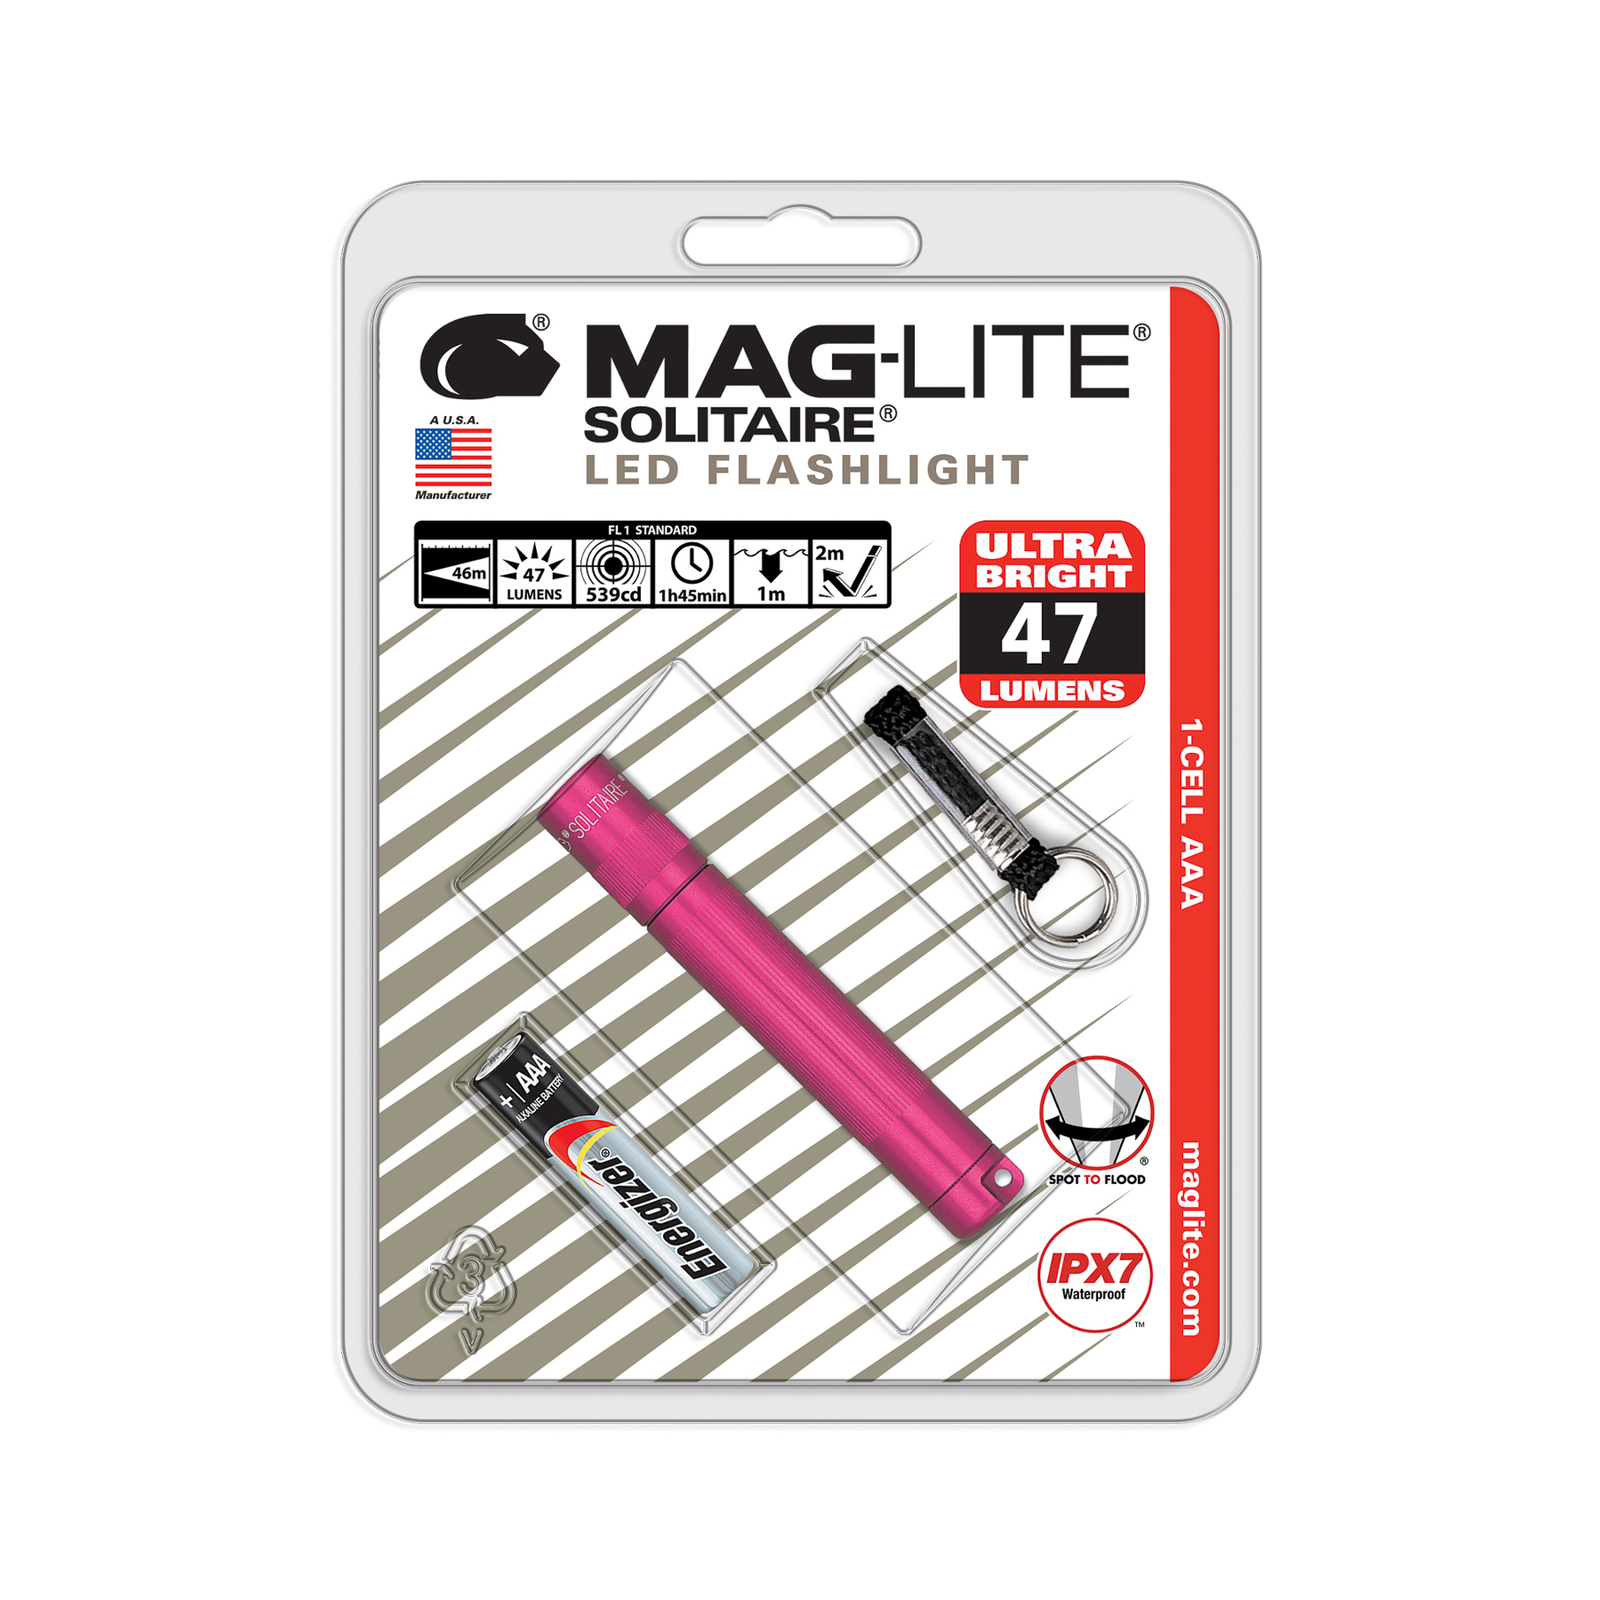 Maglite lampe de poche LED Solitaire, 1-Cell AAA, rose